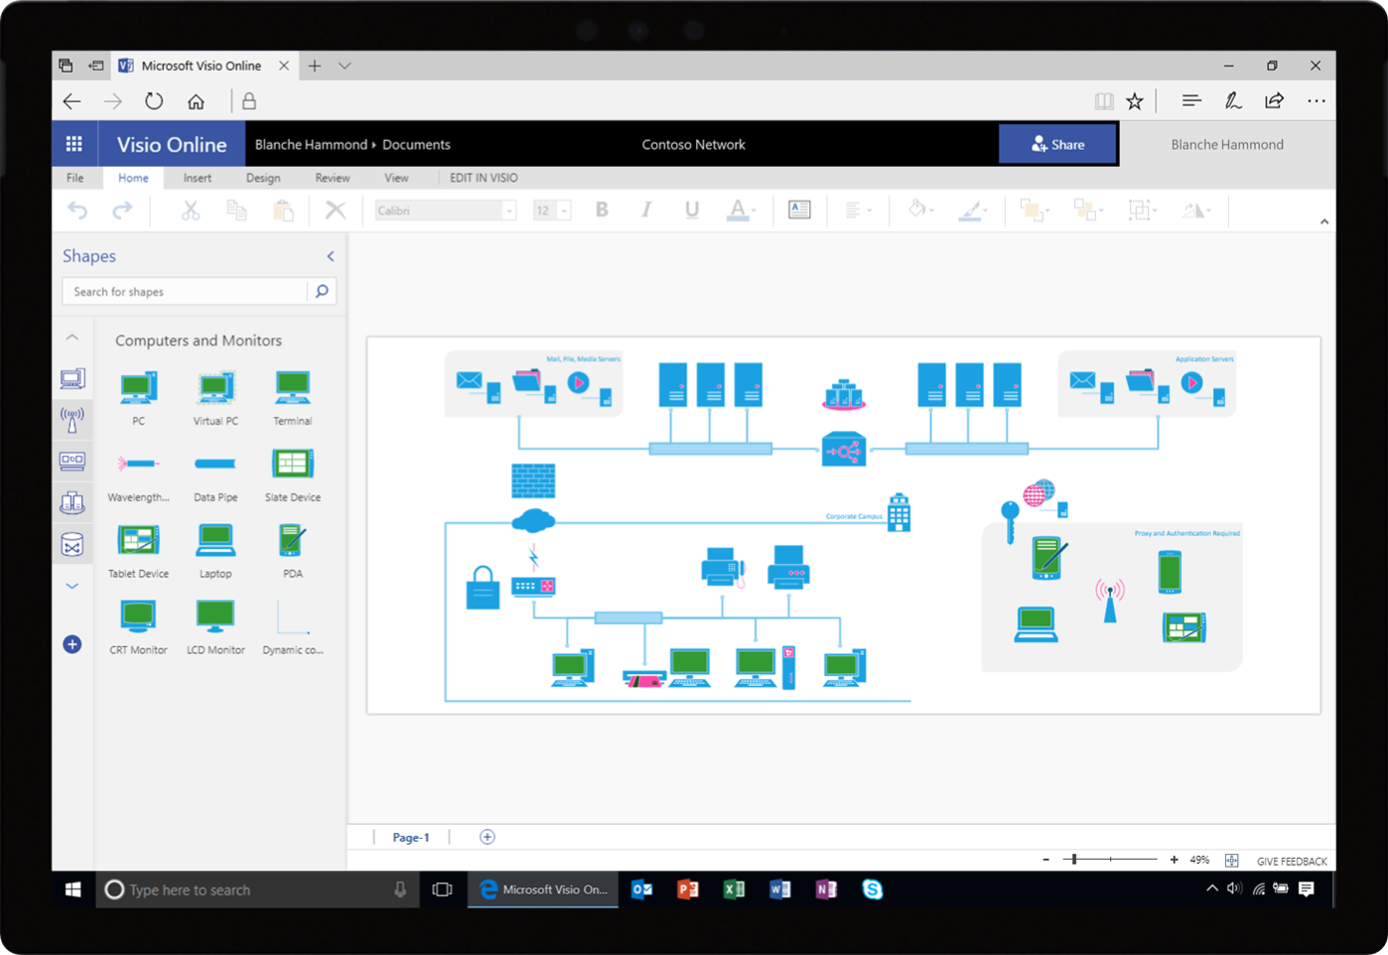 Screenshot displays network topology and equipment shapes in Visio Online.